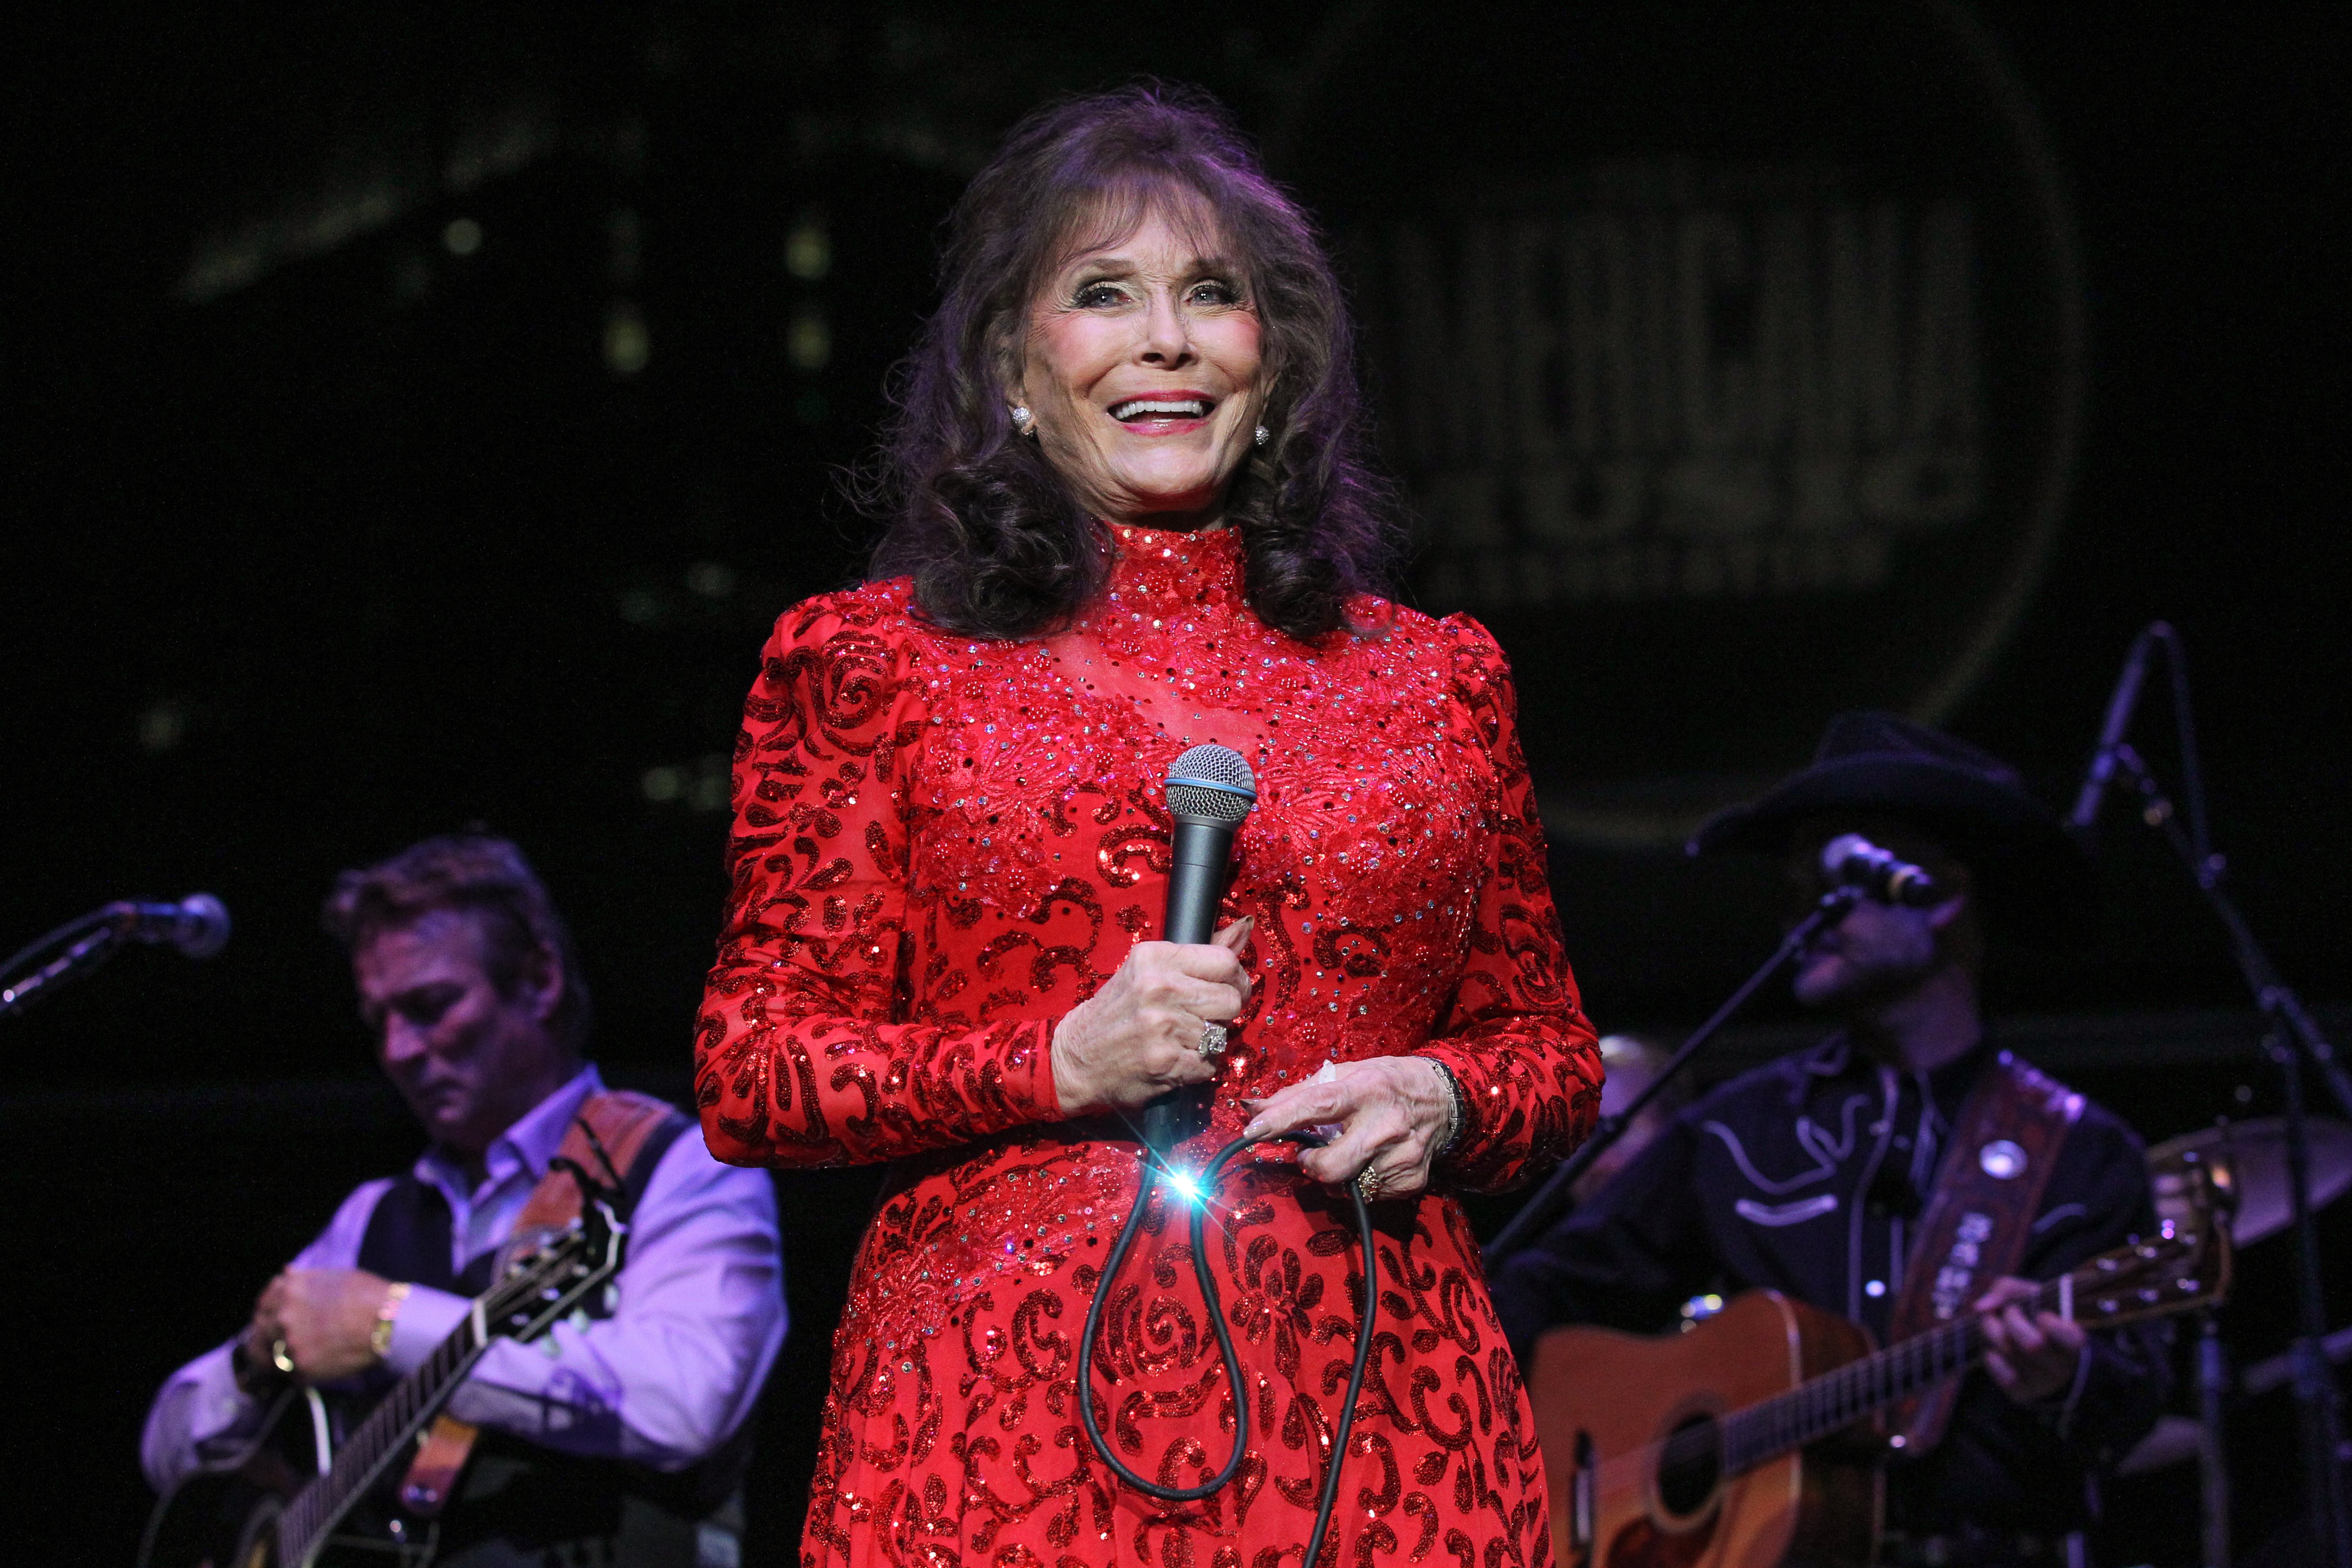 Loretta Lynn performing at the 16th Annual Americana Music Festival & Conference at Ascend Amphitheater on September 19, 2015 in Nashville, Tennessee. | Source: Getty Images